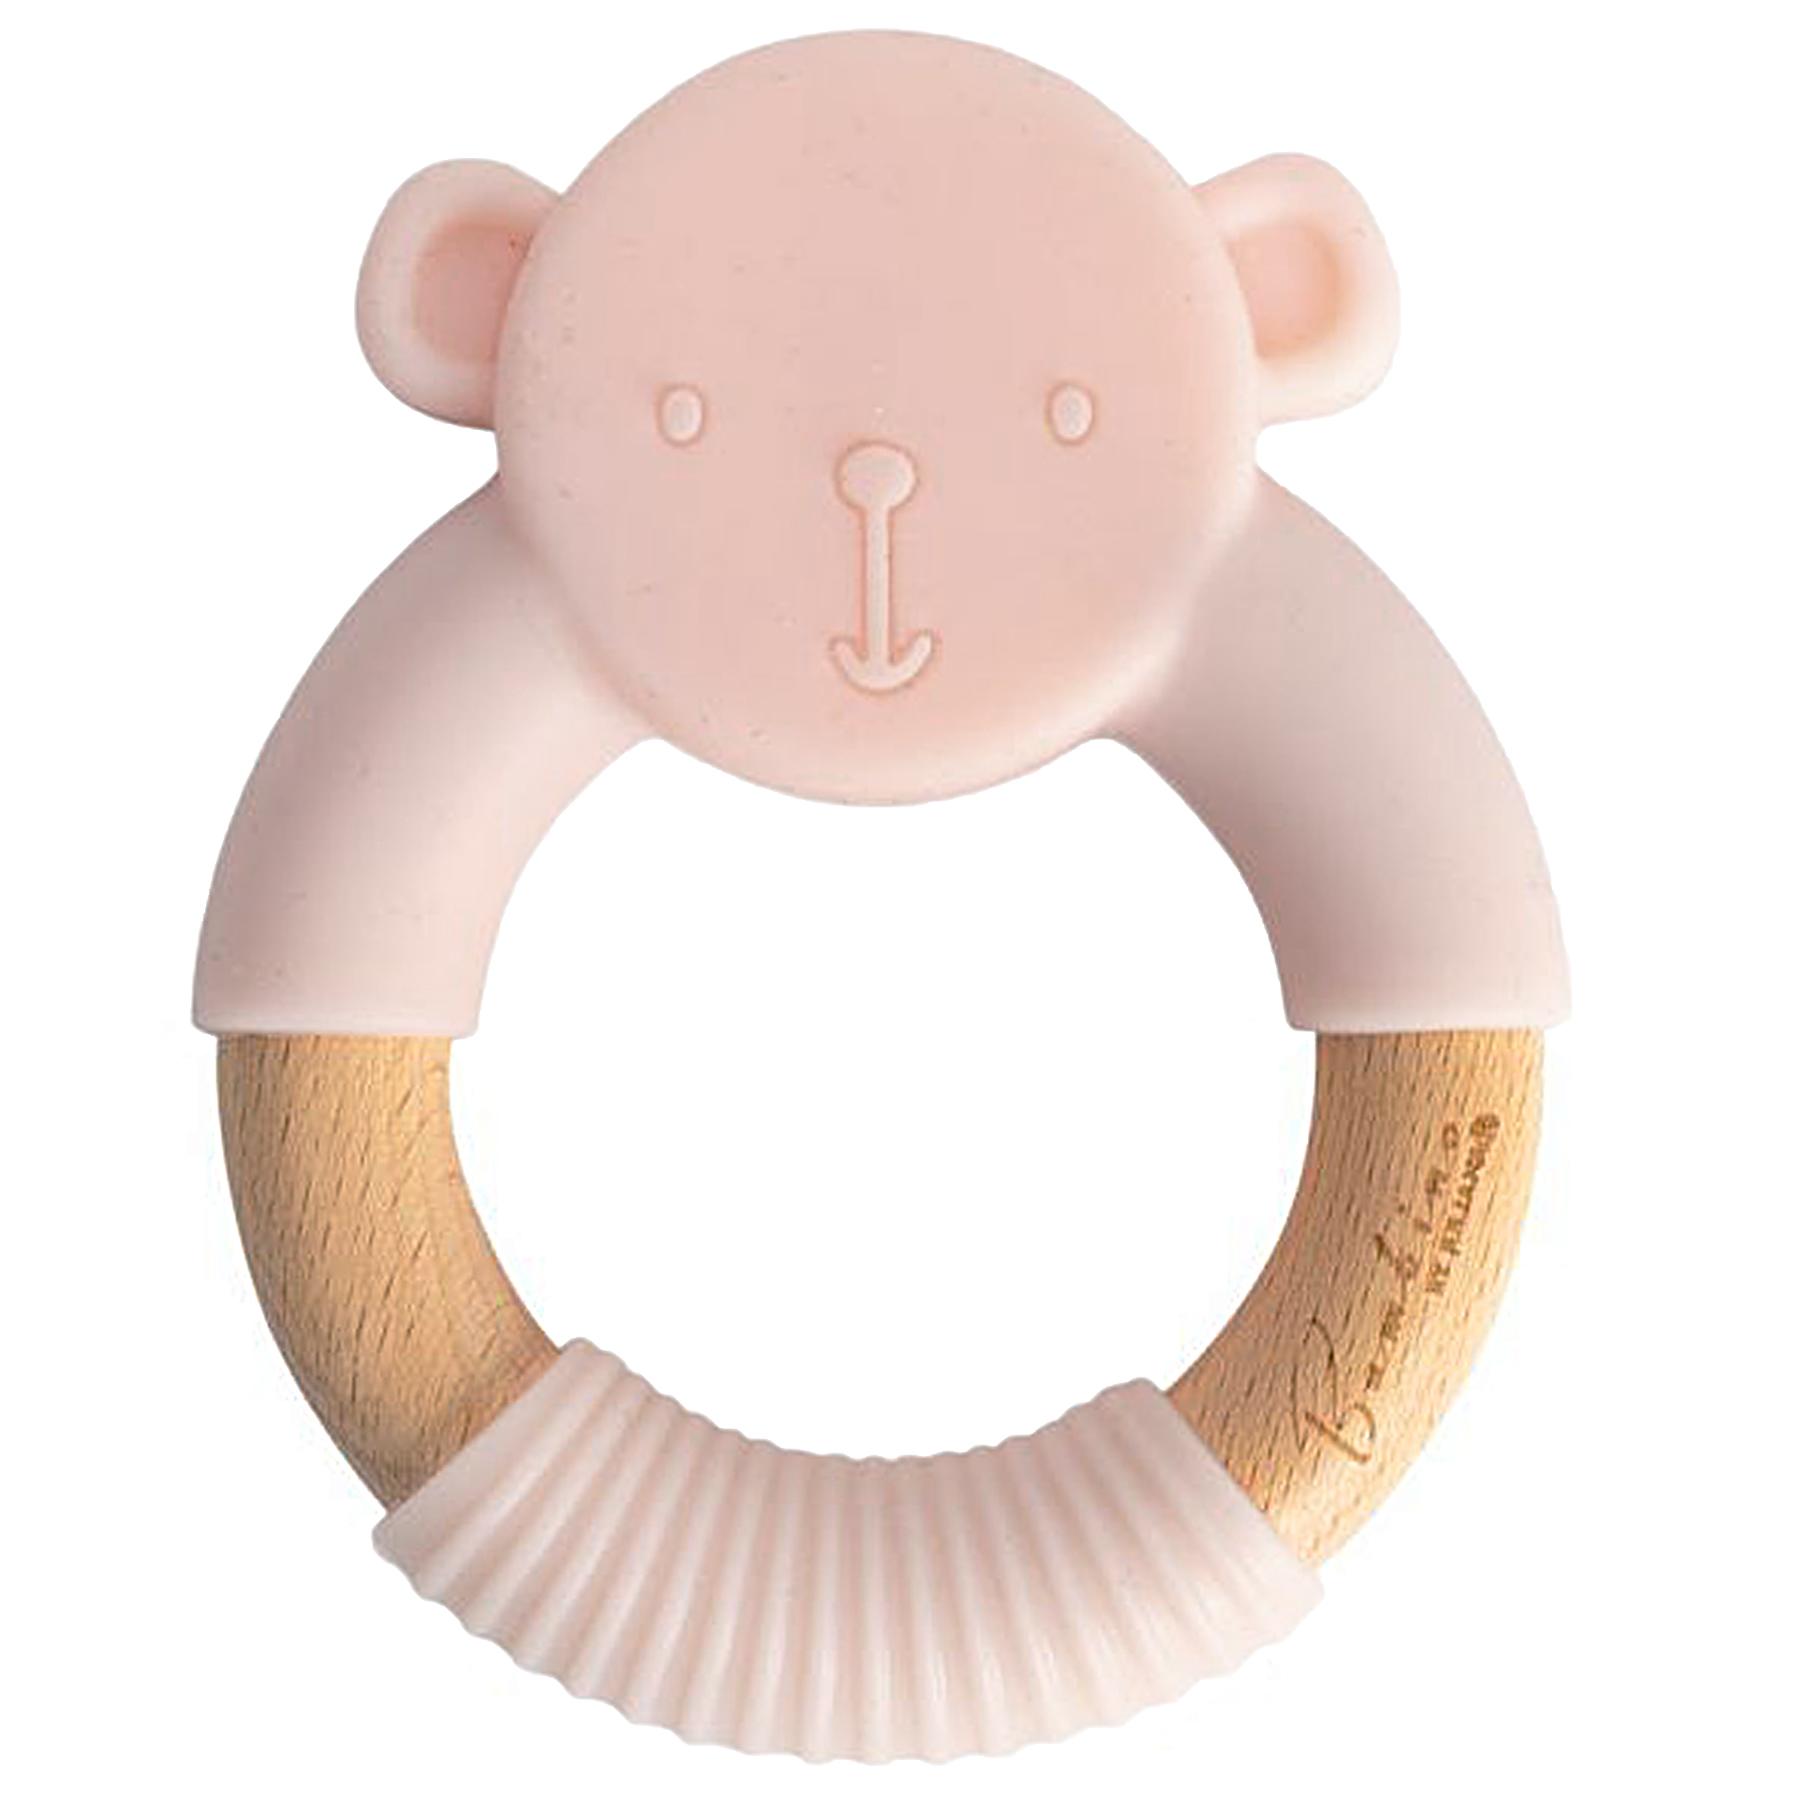 Bambino by Juliana® Round Pink Silicone Teddy & Wood Teether